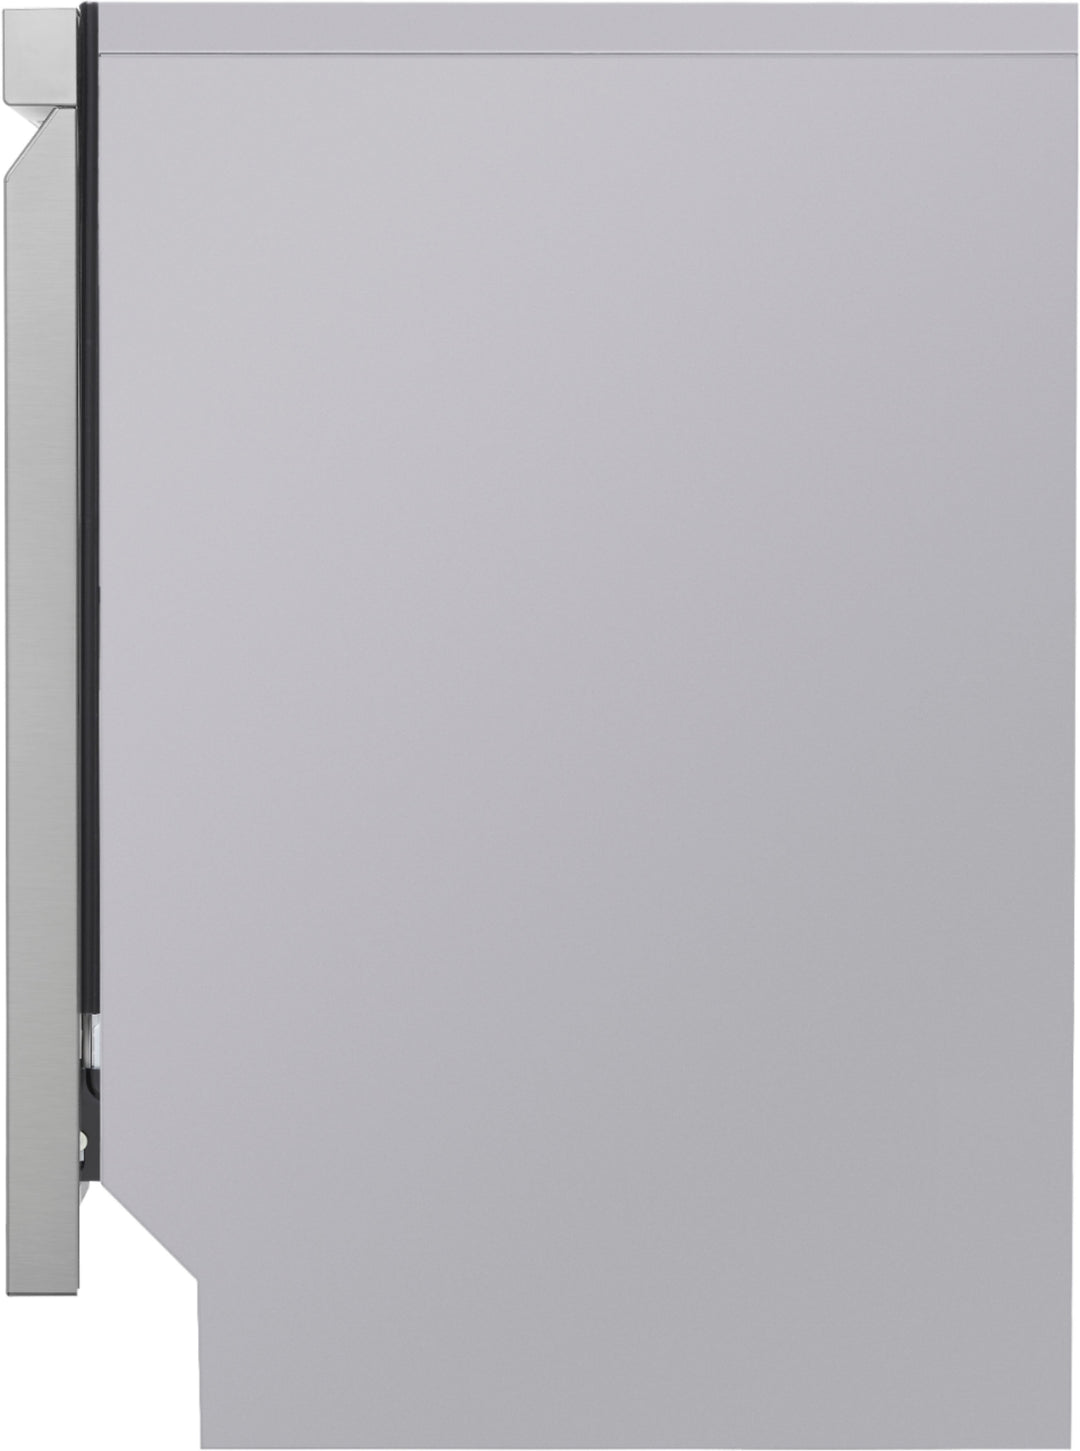 LG - 24" Front Control Smart Built-In Stainless Steel Tub Dishwasher with 3rd Rack, Quadwash, and 48dba - Stainless steel_9